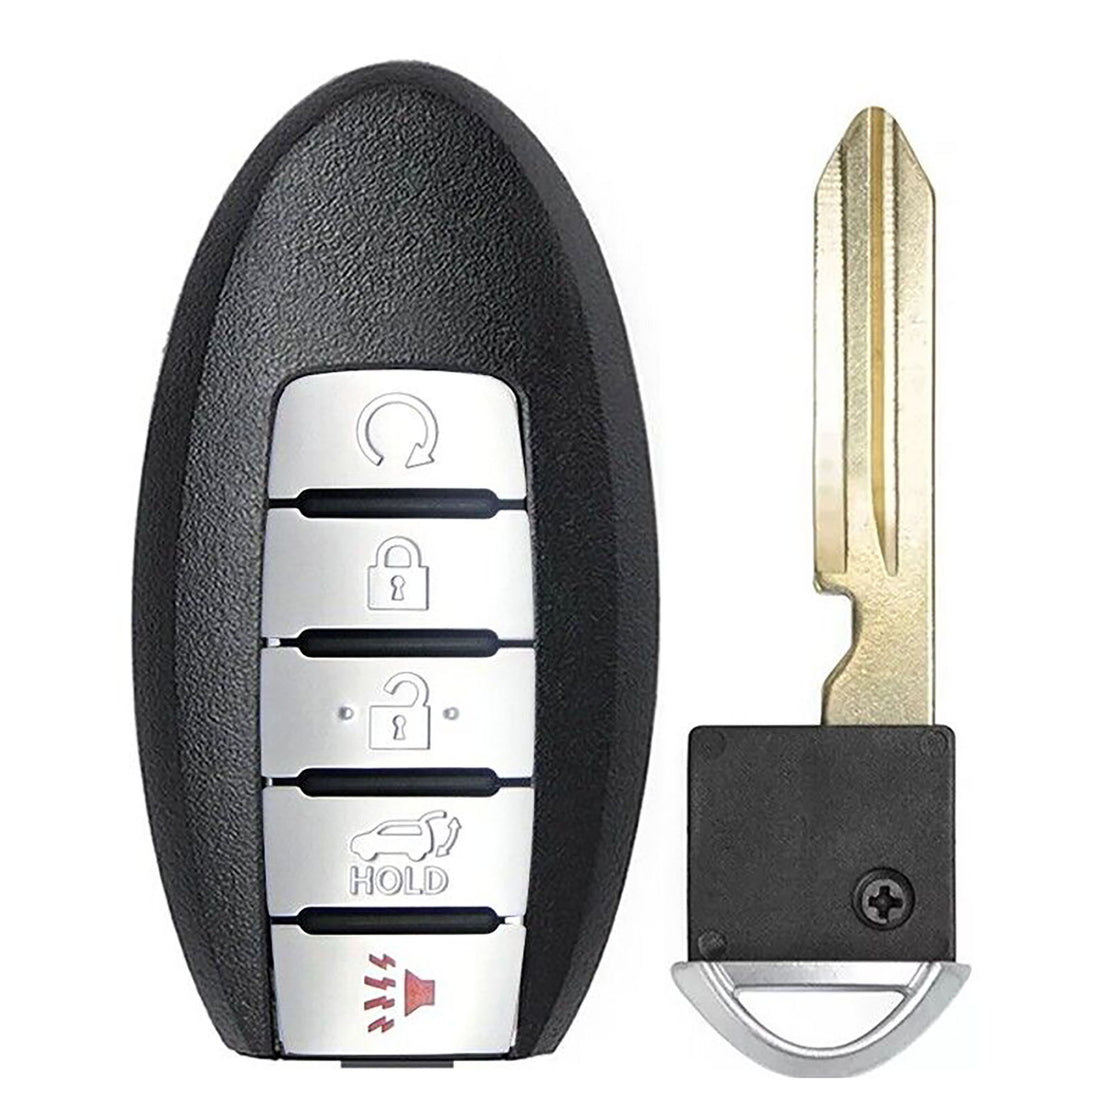 1x New Replacement Proximity Key Fob Compatible with & Fit For Nissan Infiniti Read Description - MPN CWTWB1G744-02